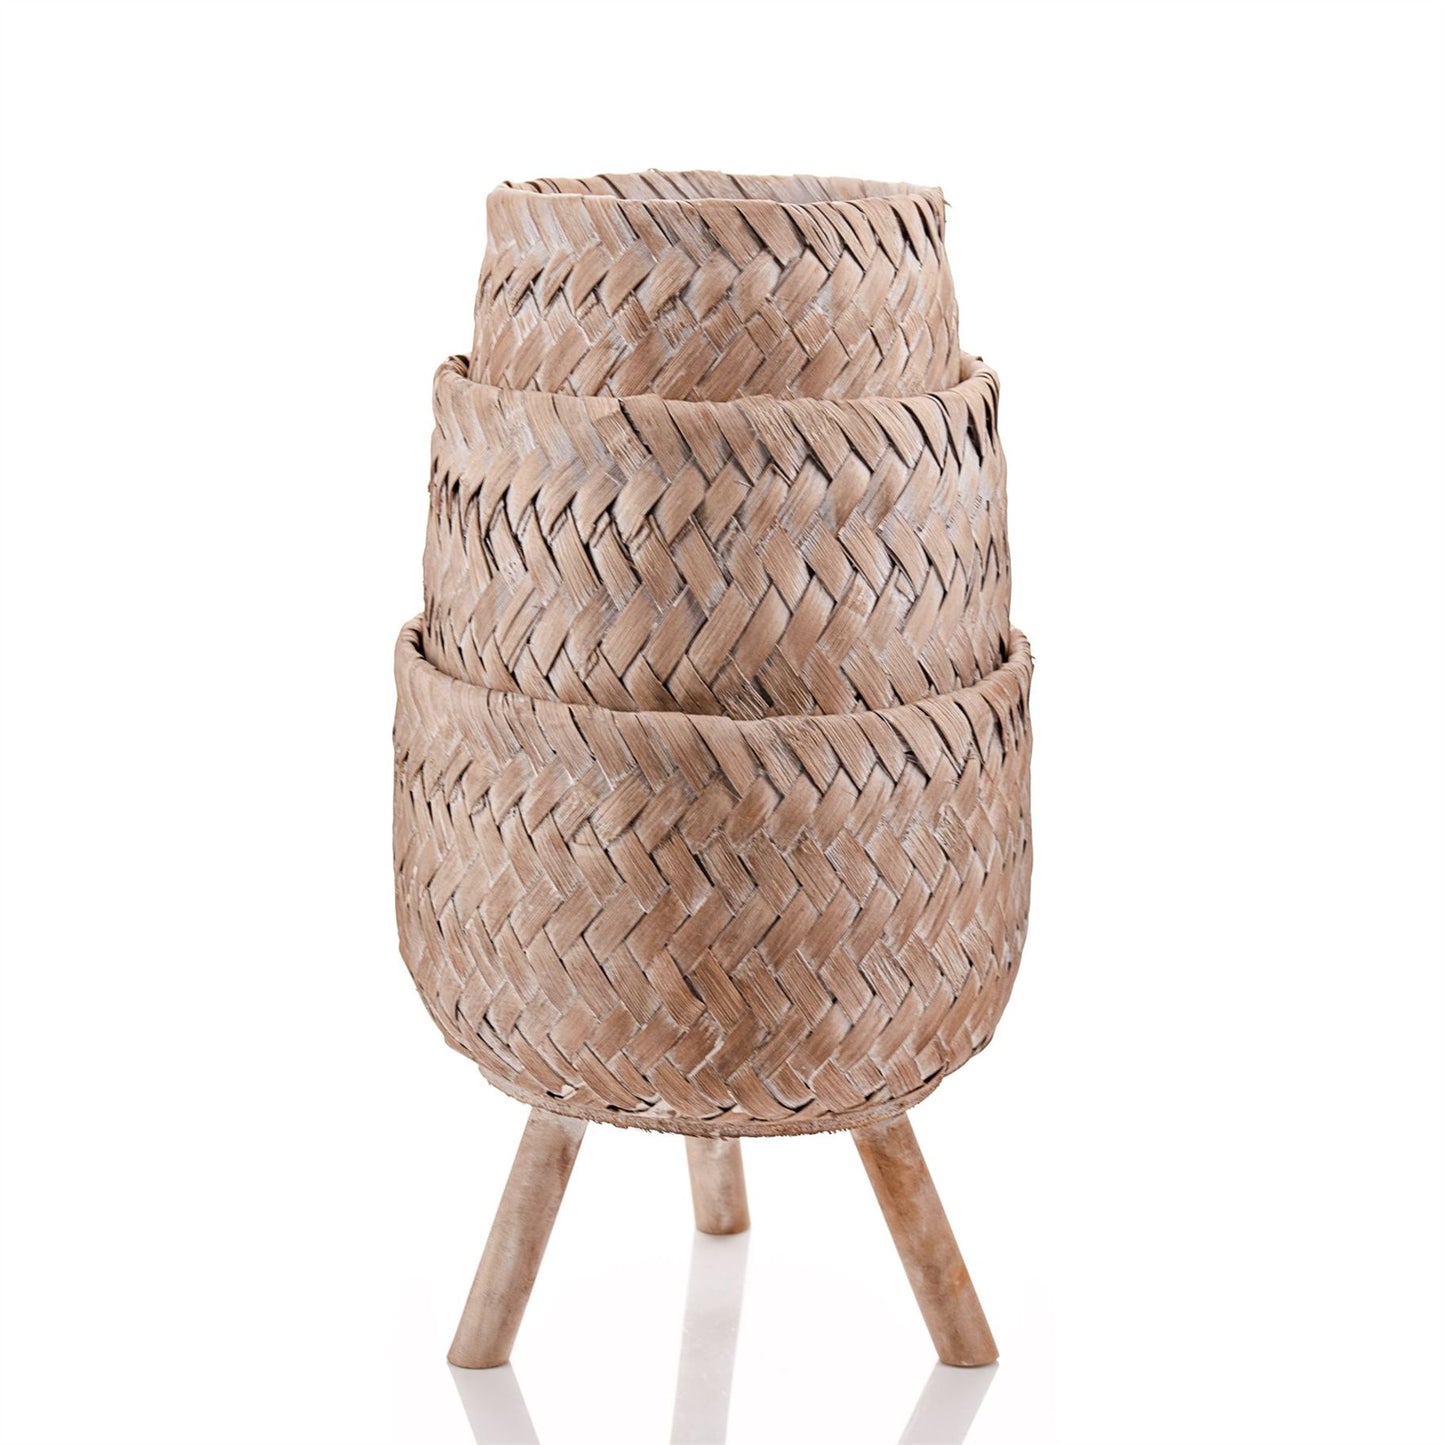 Hestia Set of 3 Woven Bamboo Indoor Footed Planters